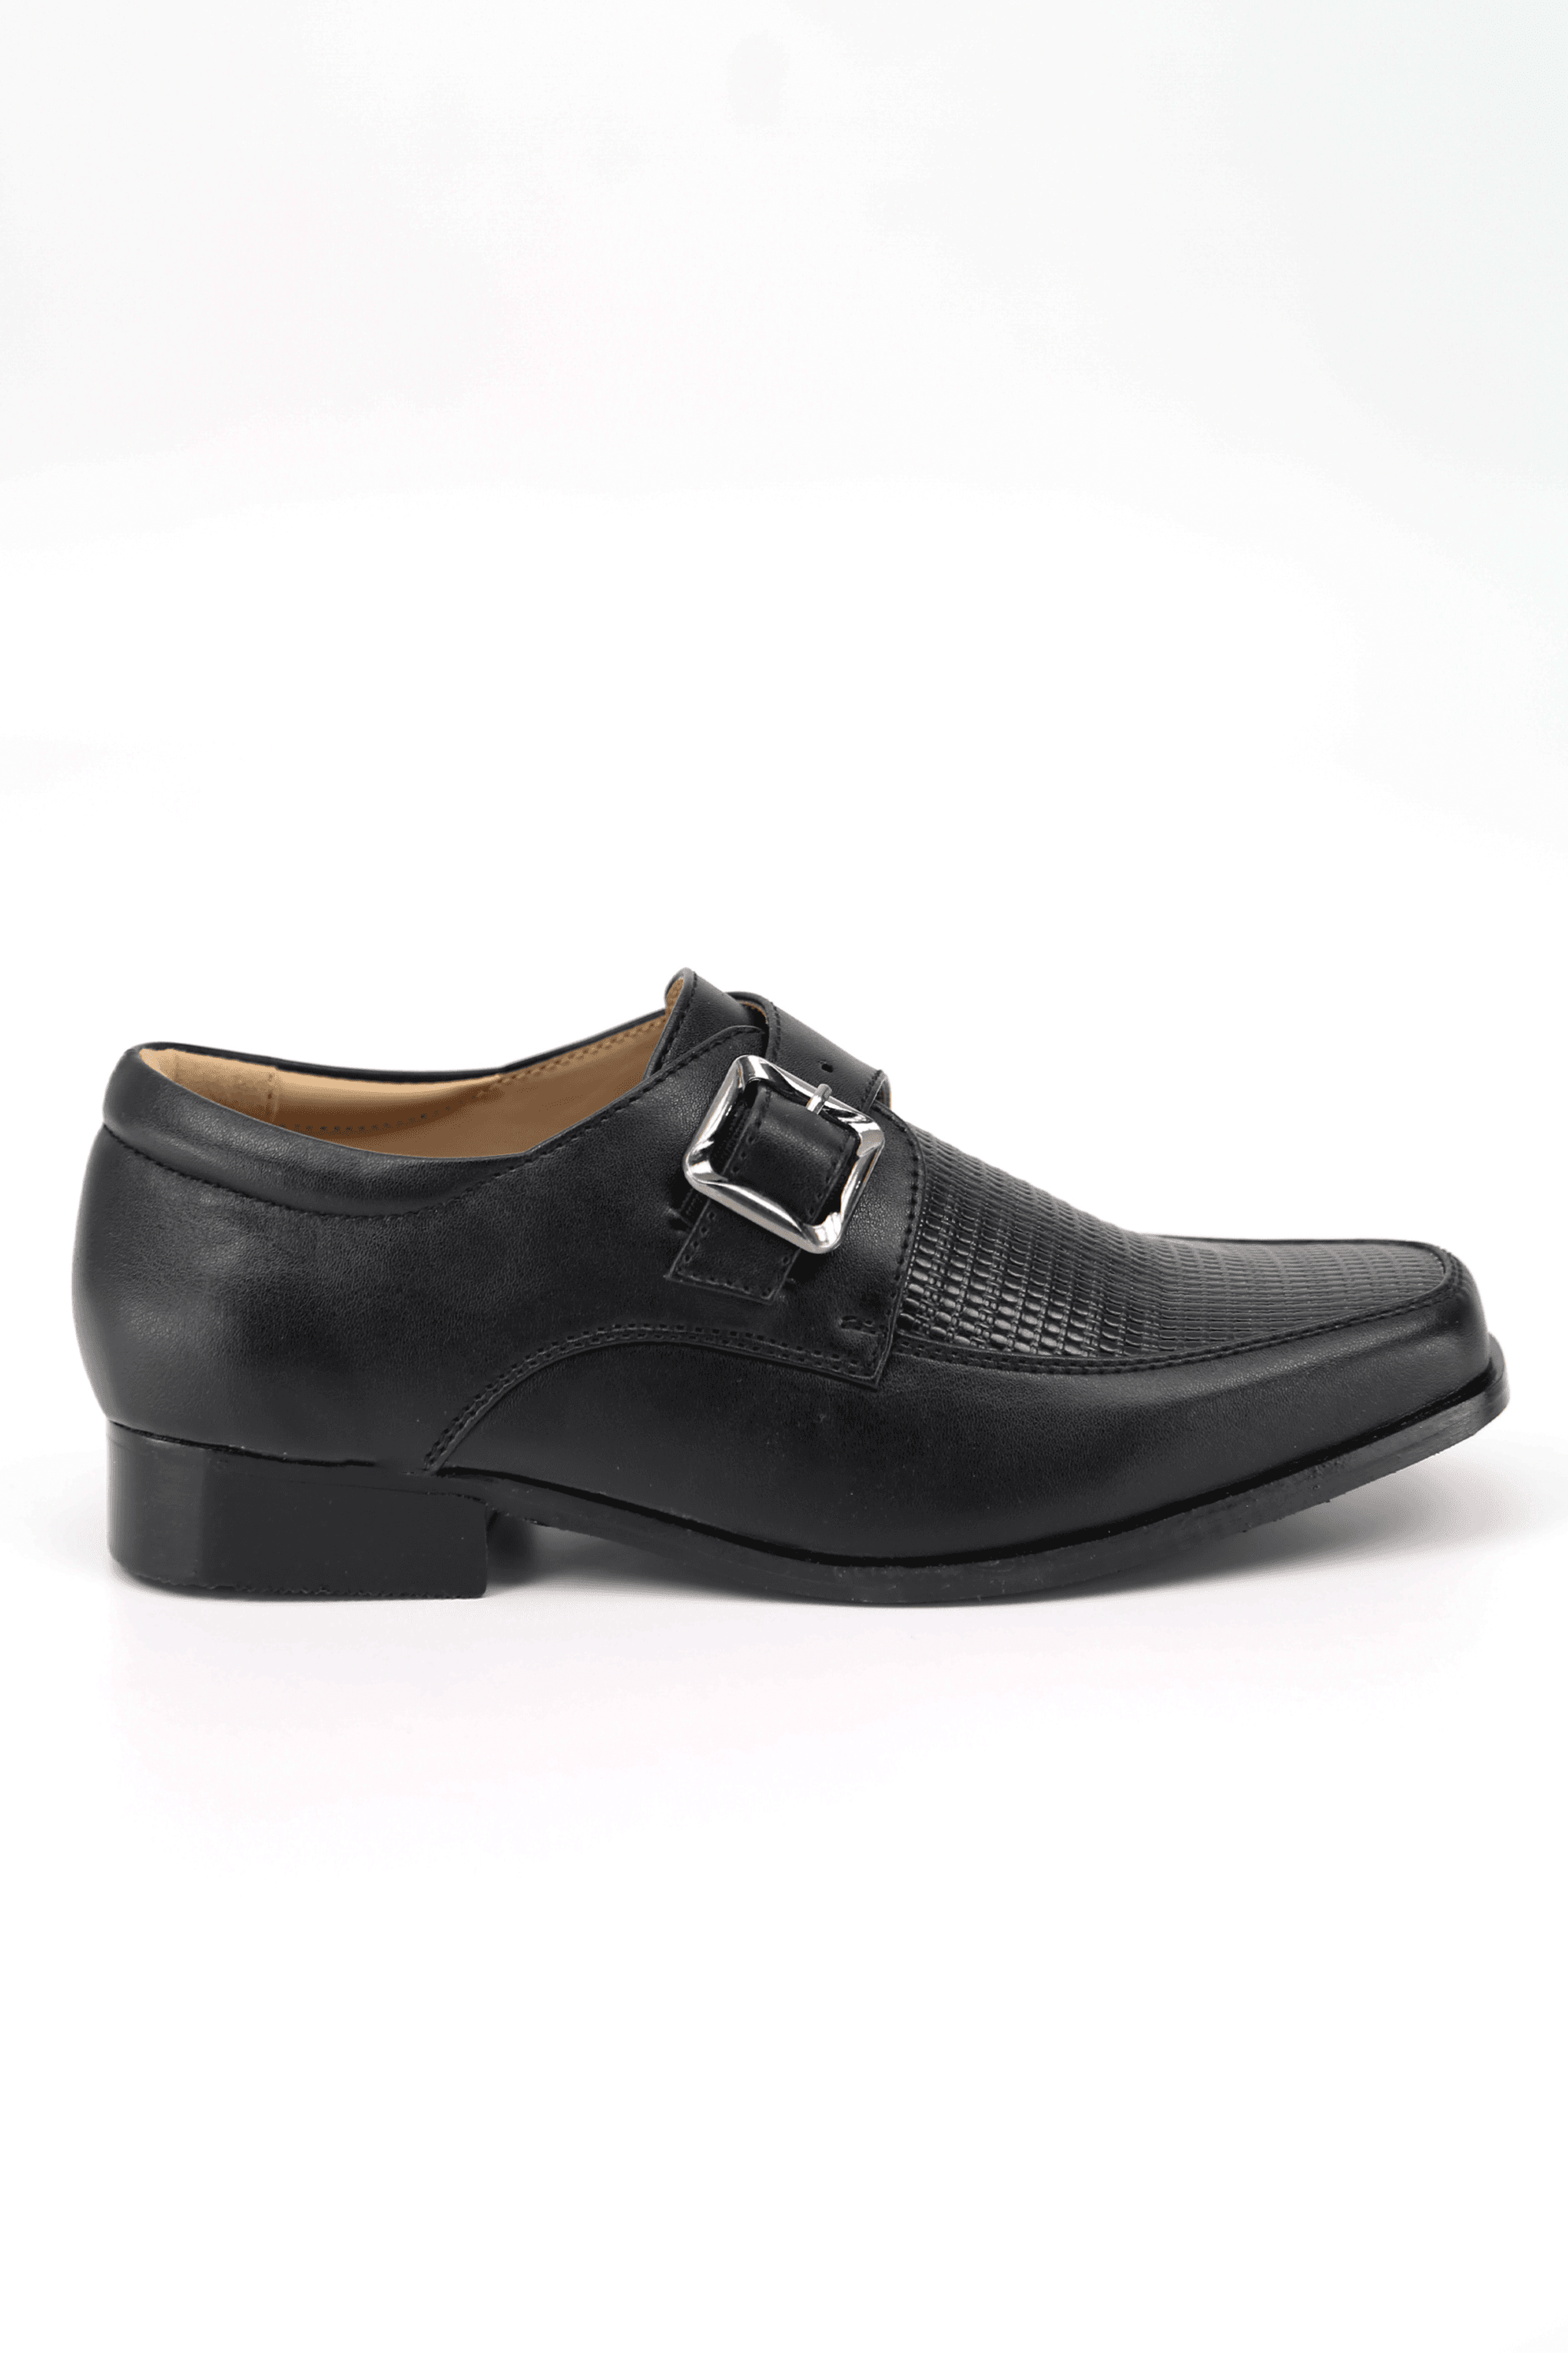 Boys Textured Leather Buckled Monk Shoes - Black